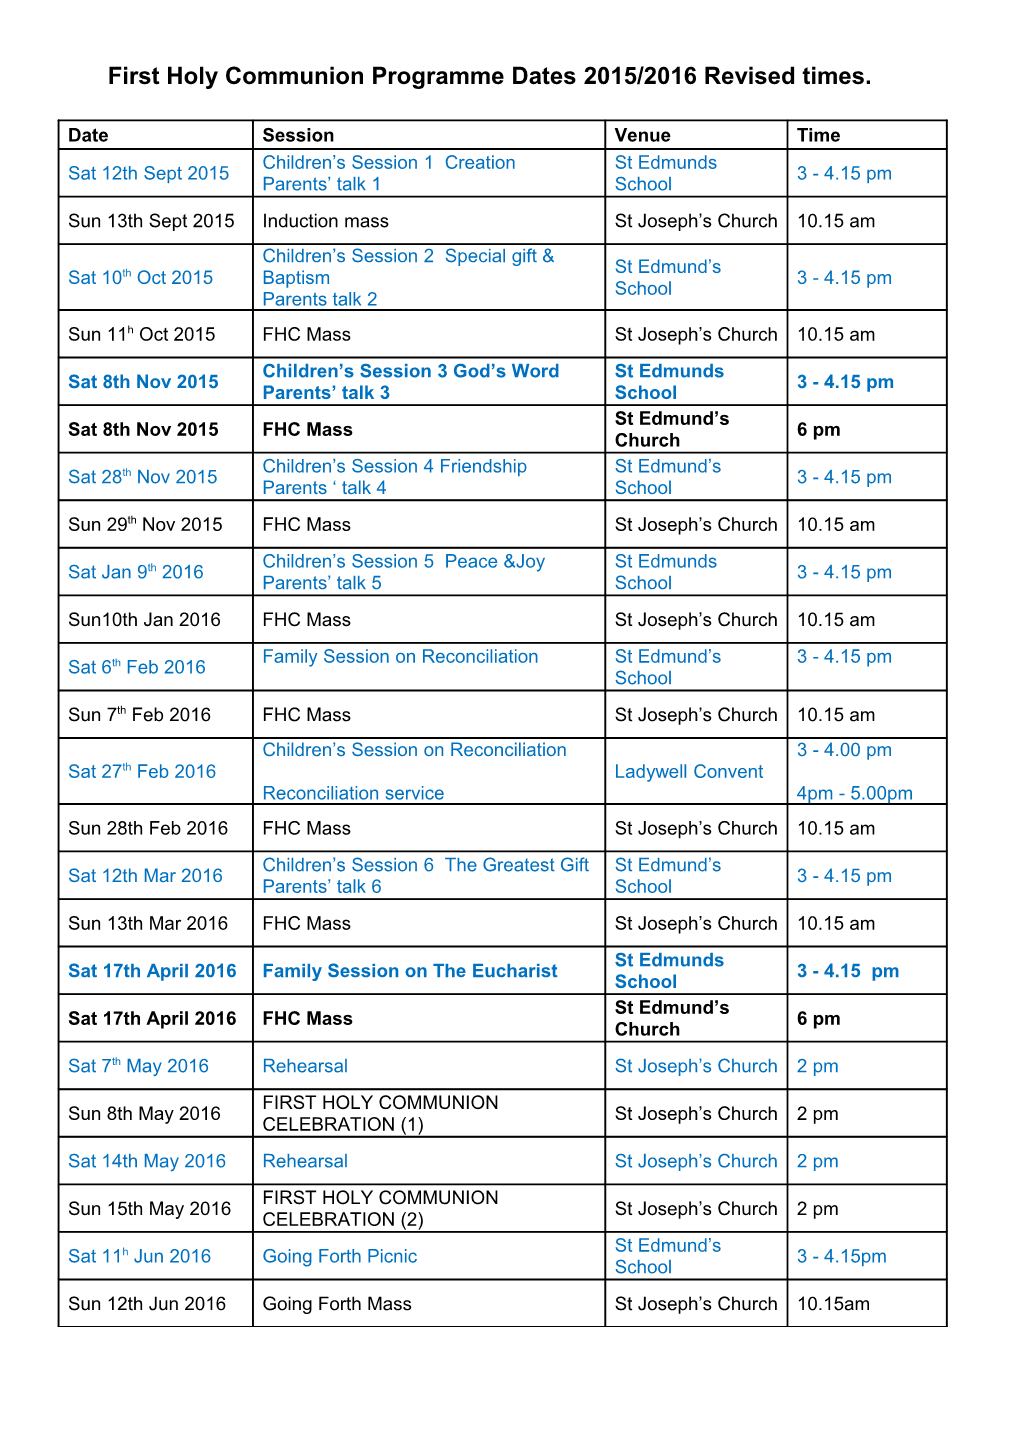 First Holy Communion Programme Dates 2013/2014